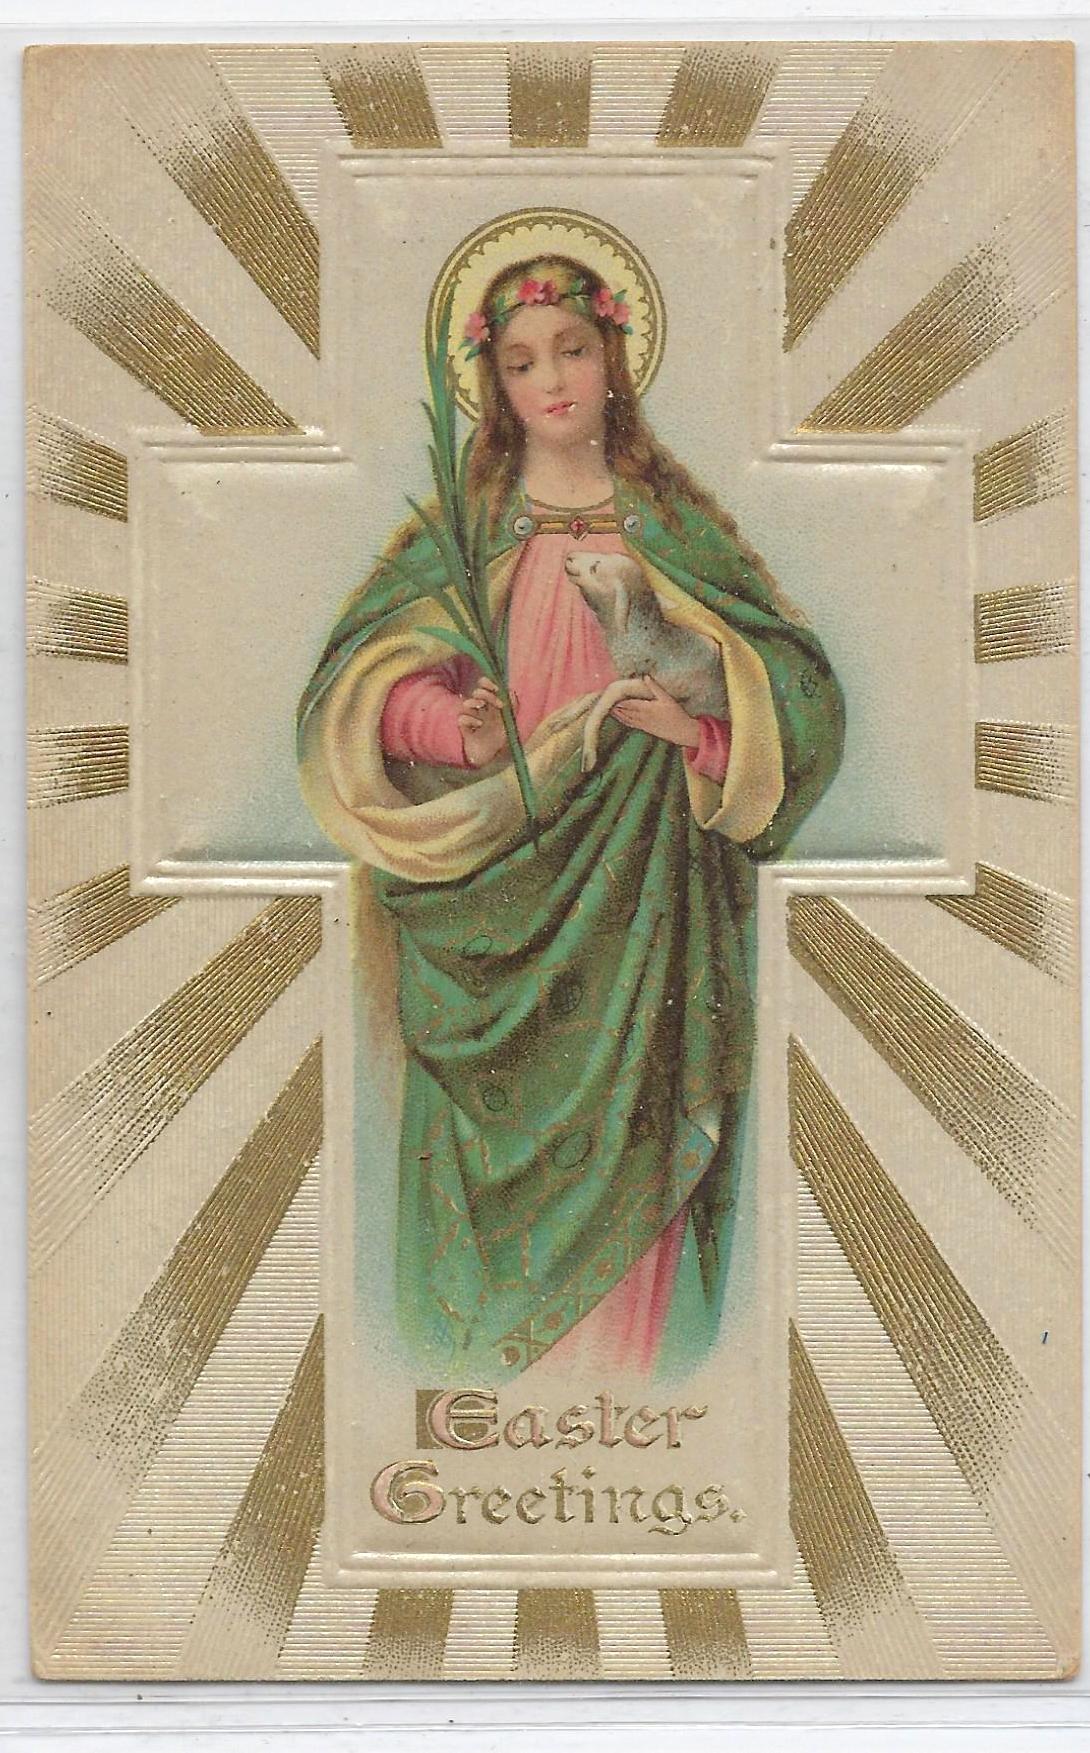 Easter Greetings Postcard Woman Saint Holding Lamb Gold Highlights Over Silver Background Embossed No.16101 Germany